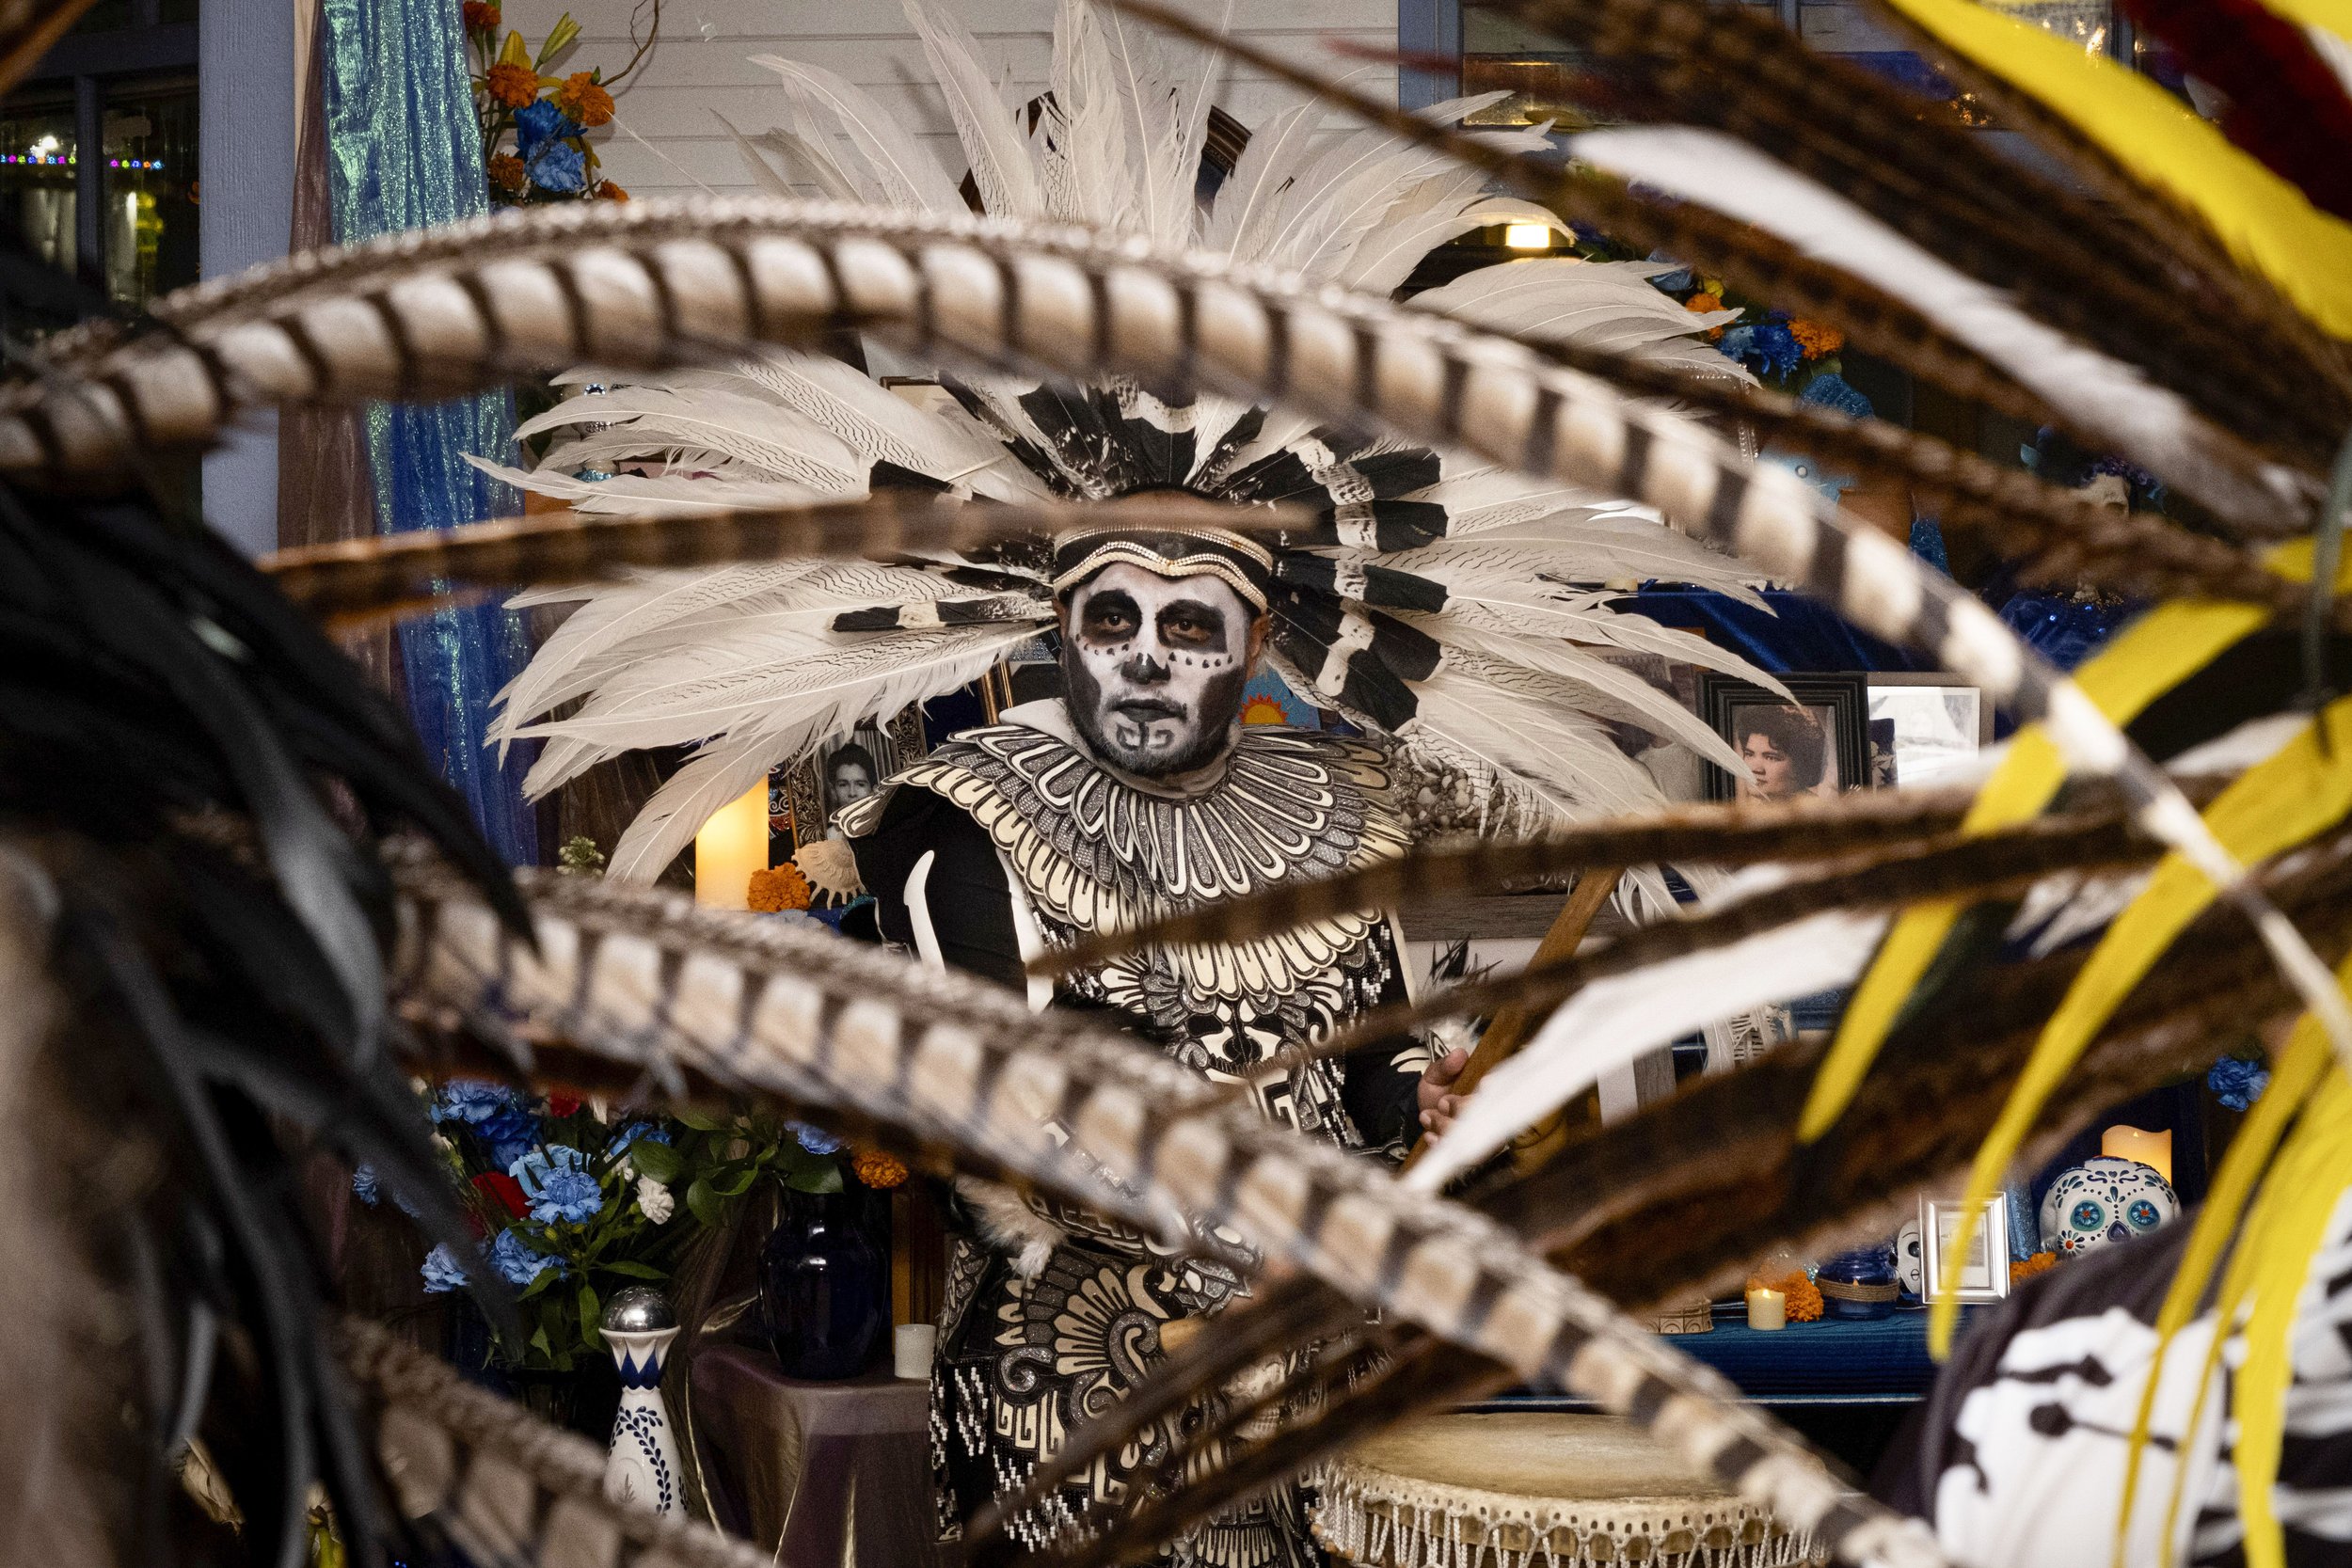  Member of the Kalpoli Tonelhuayo circle Fernando Ferrer drums in synchronization with the beat of the Azteca dance in front of the altars. Dia de Los Muertos alters were created in honor and remembrance of celebrating the lives of people’s loved one